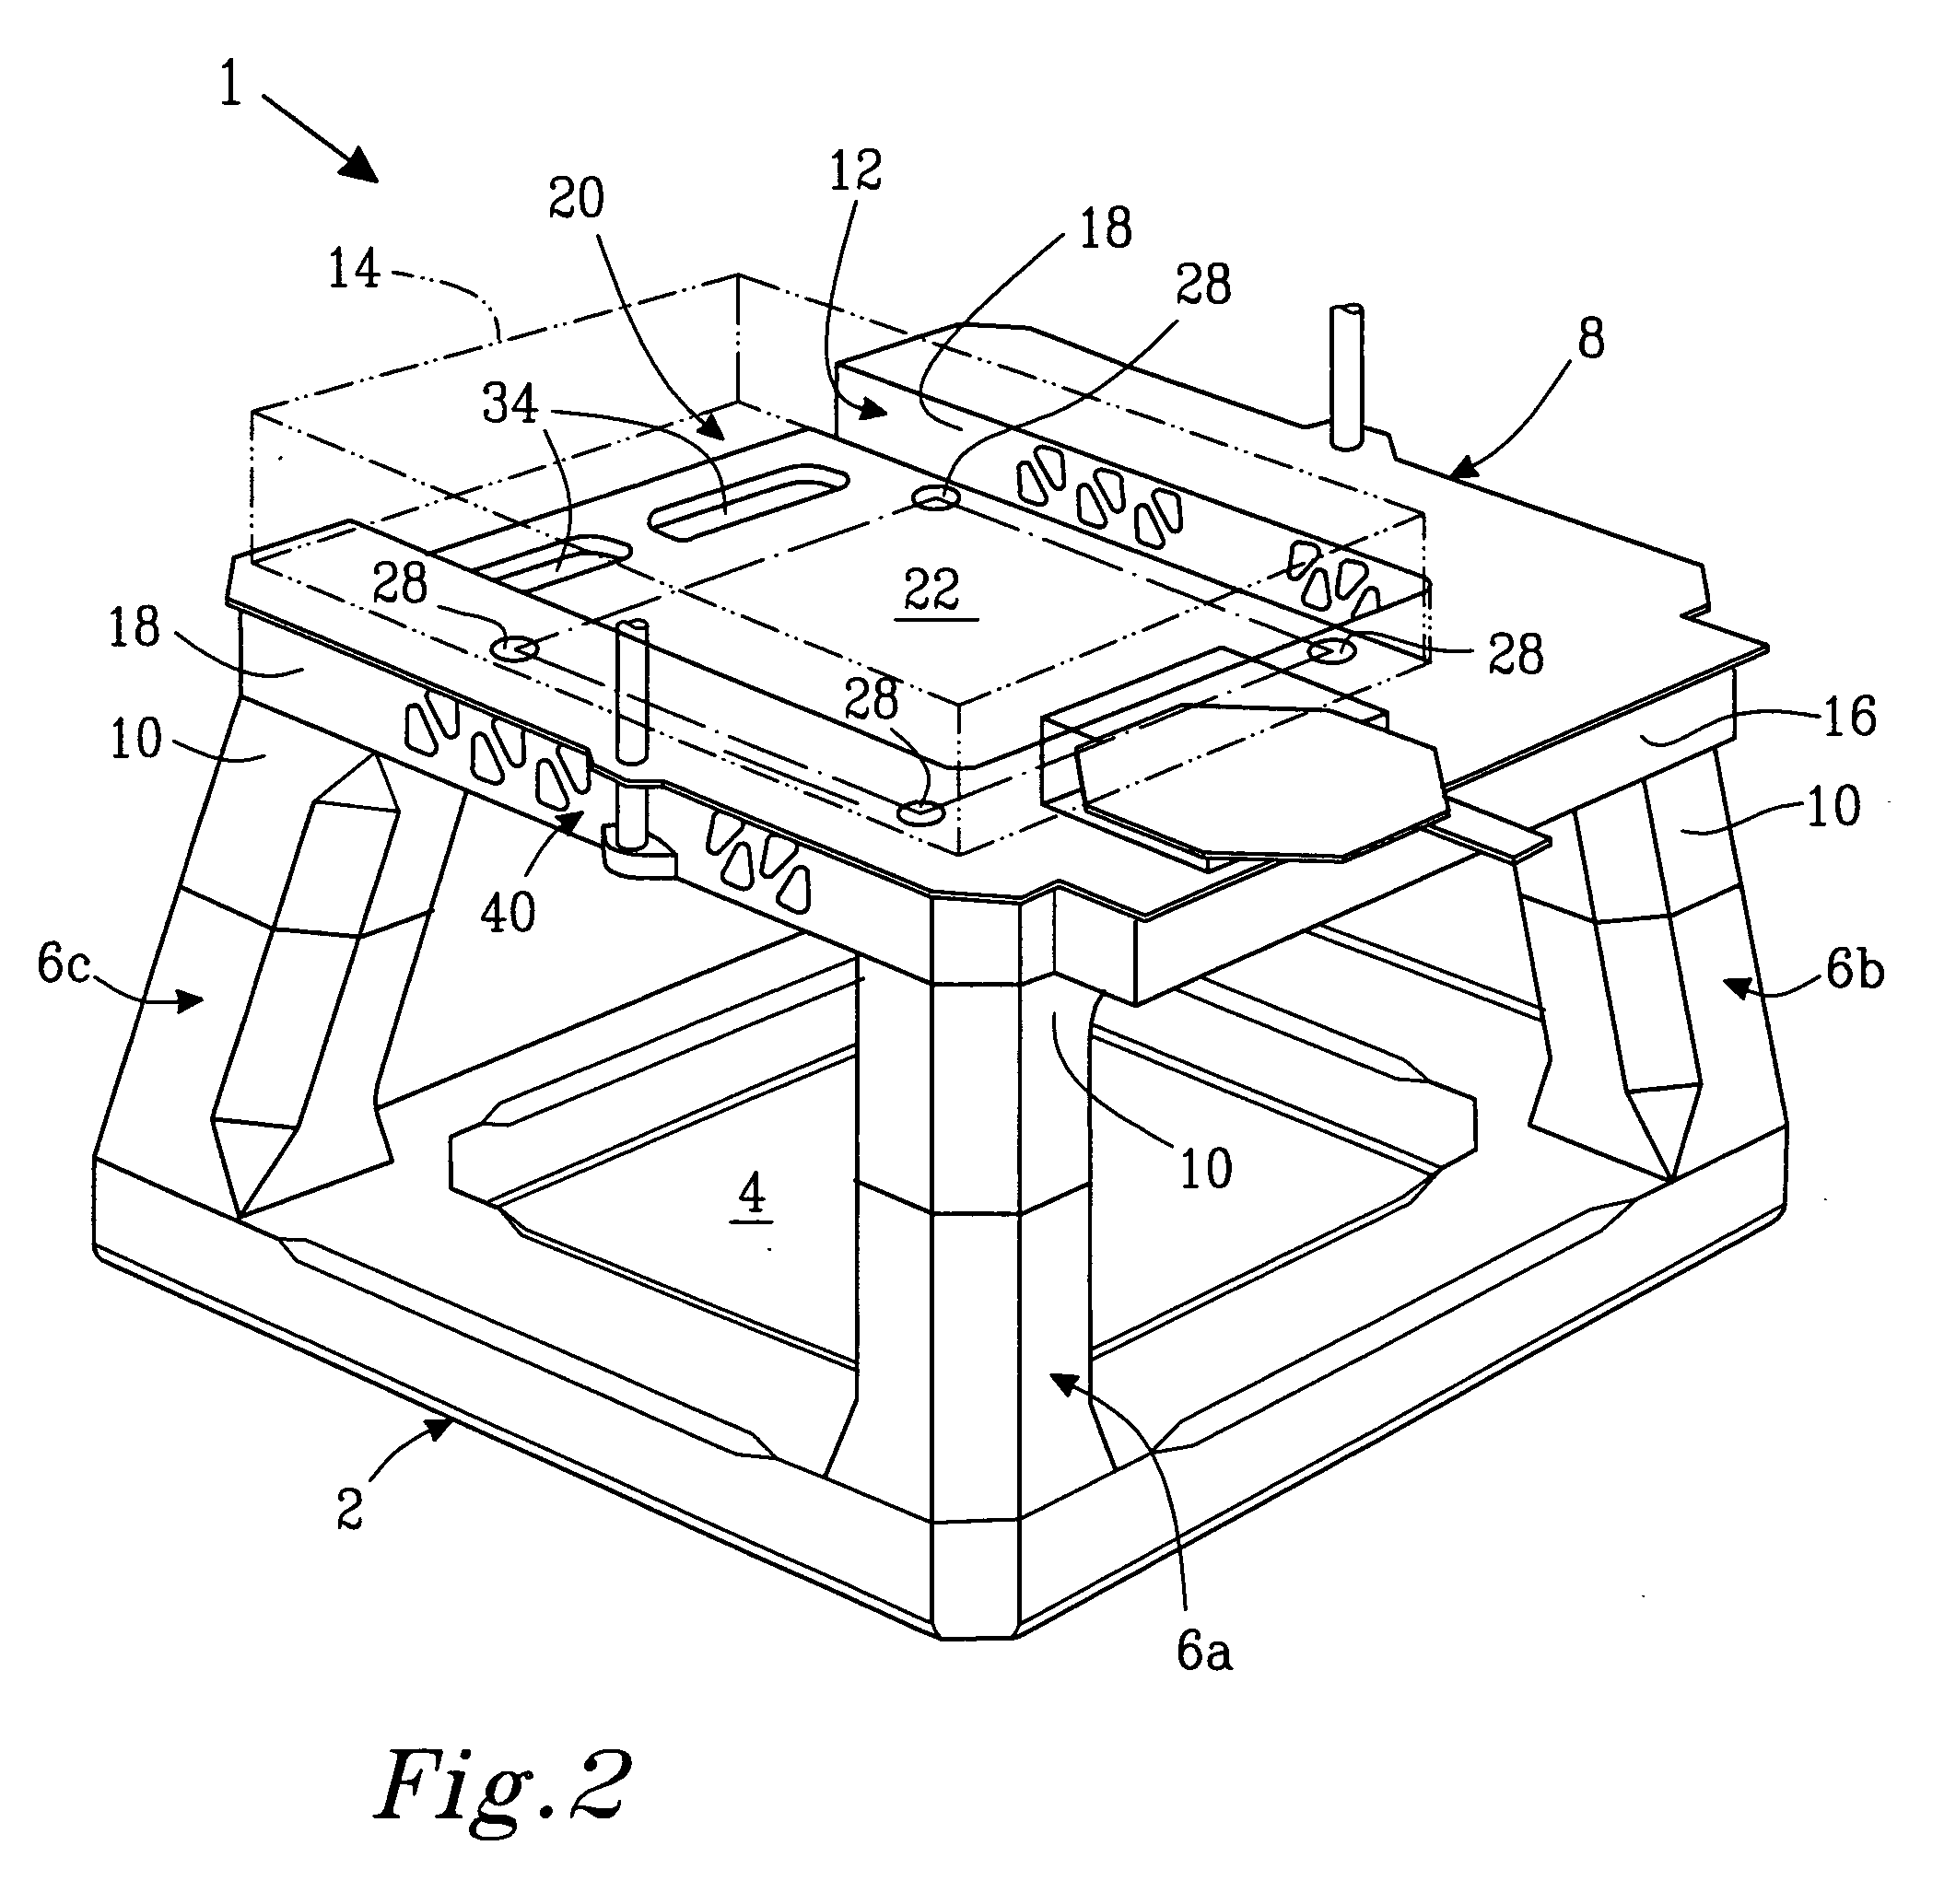 Semi-submersible offshore vessel and methods for positioning operation modules on said vessel